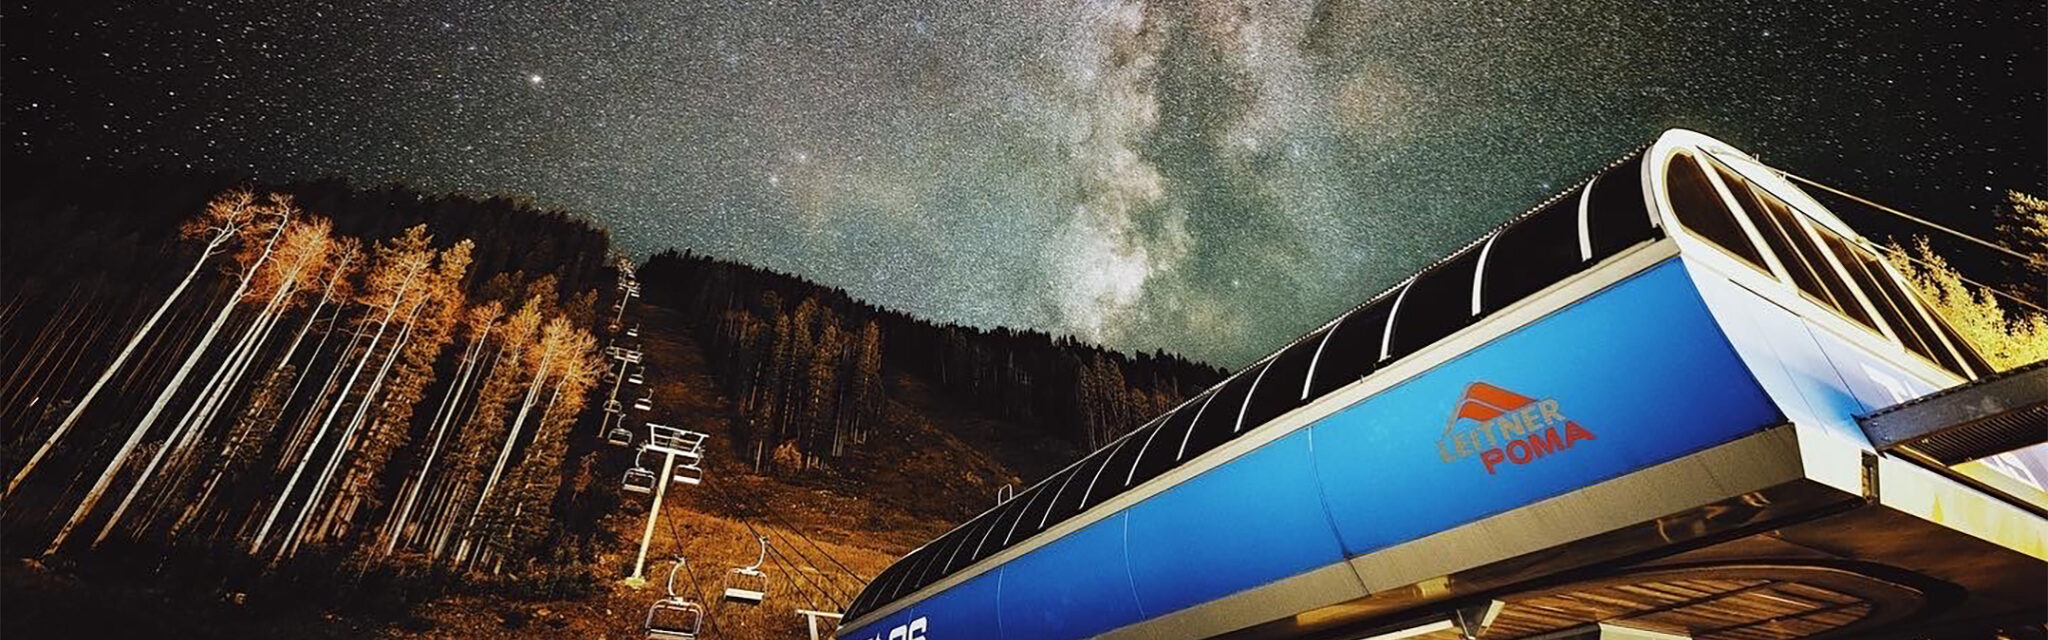 The milky way shines brightly over a ski lift house.